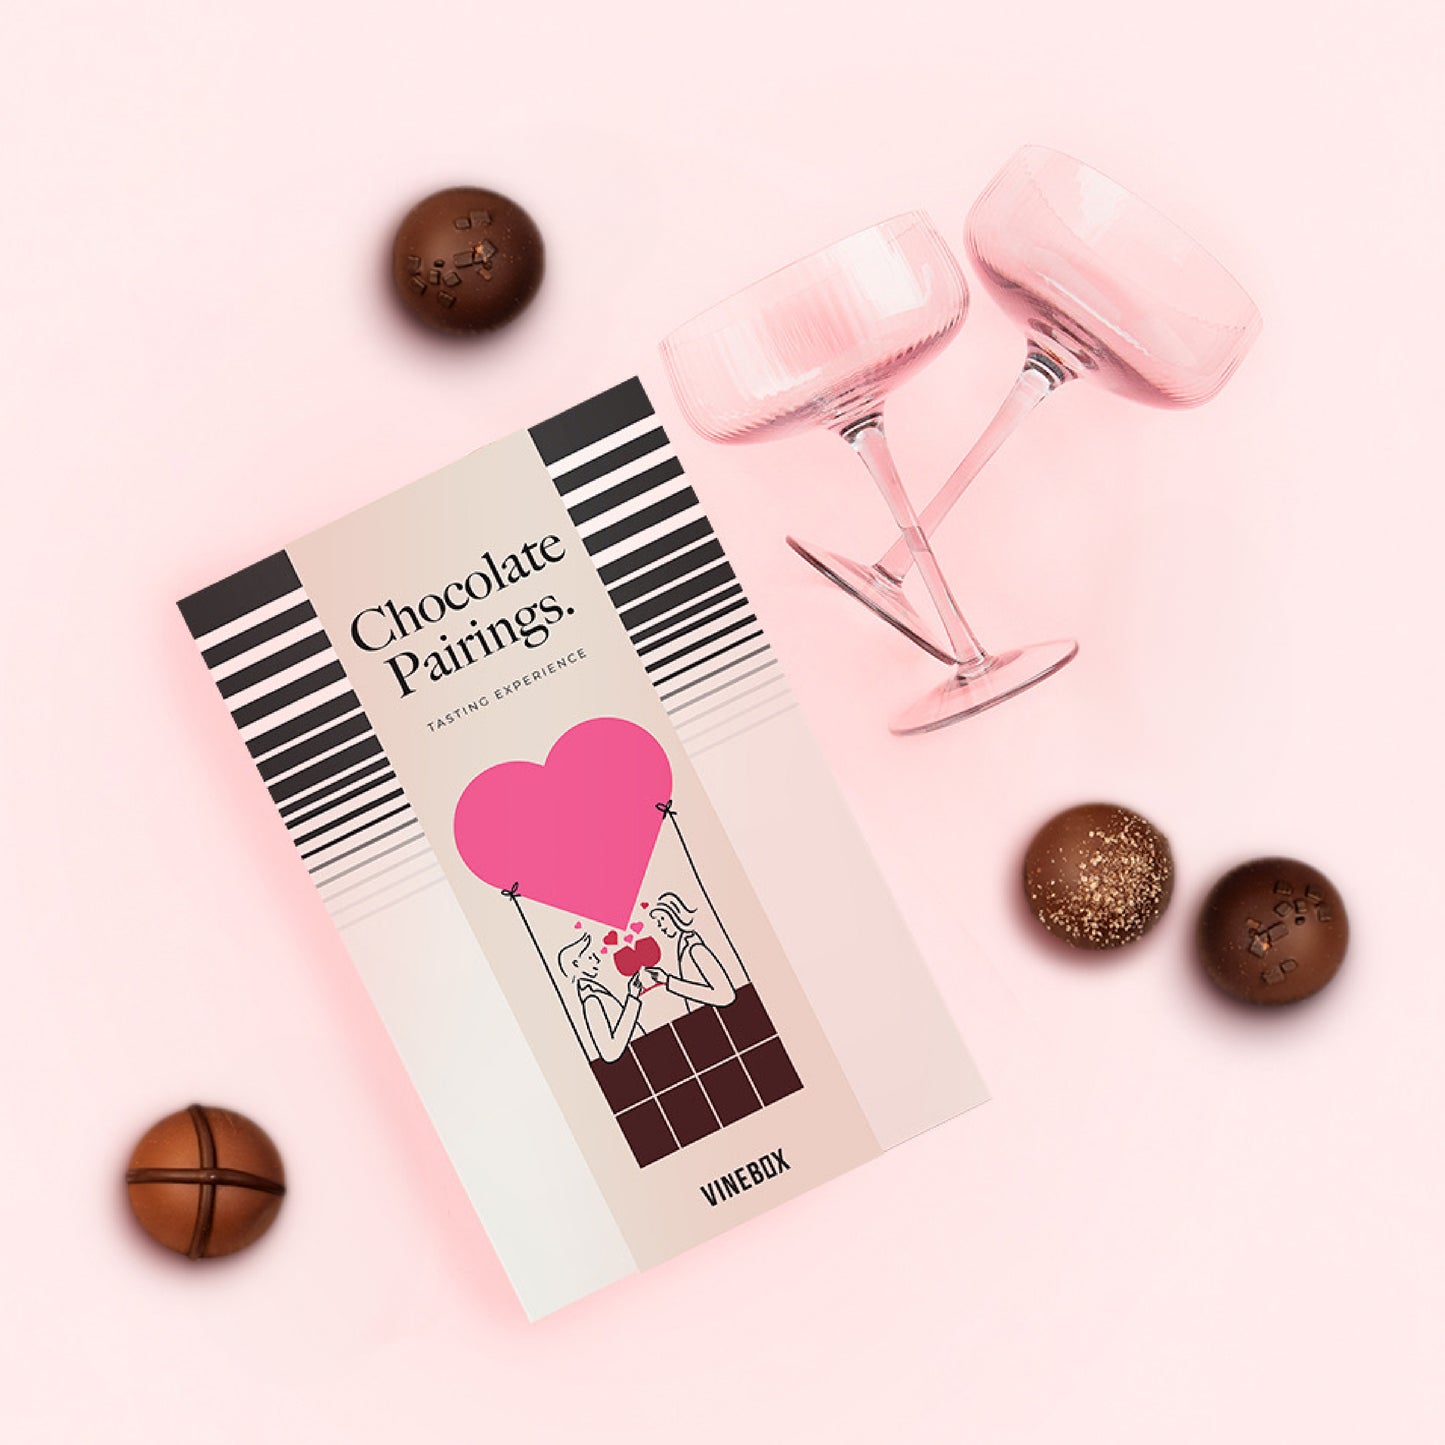 February Box of the Month - Chocolate Pairing